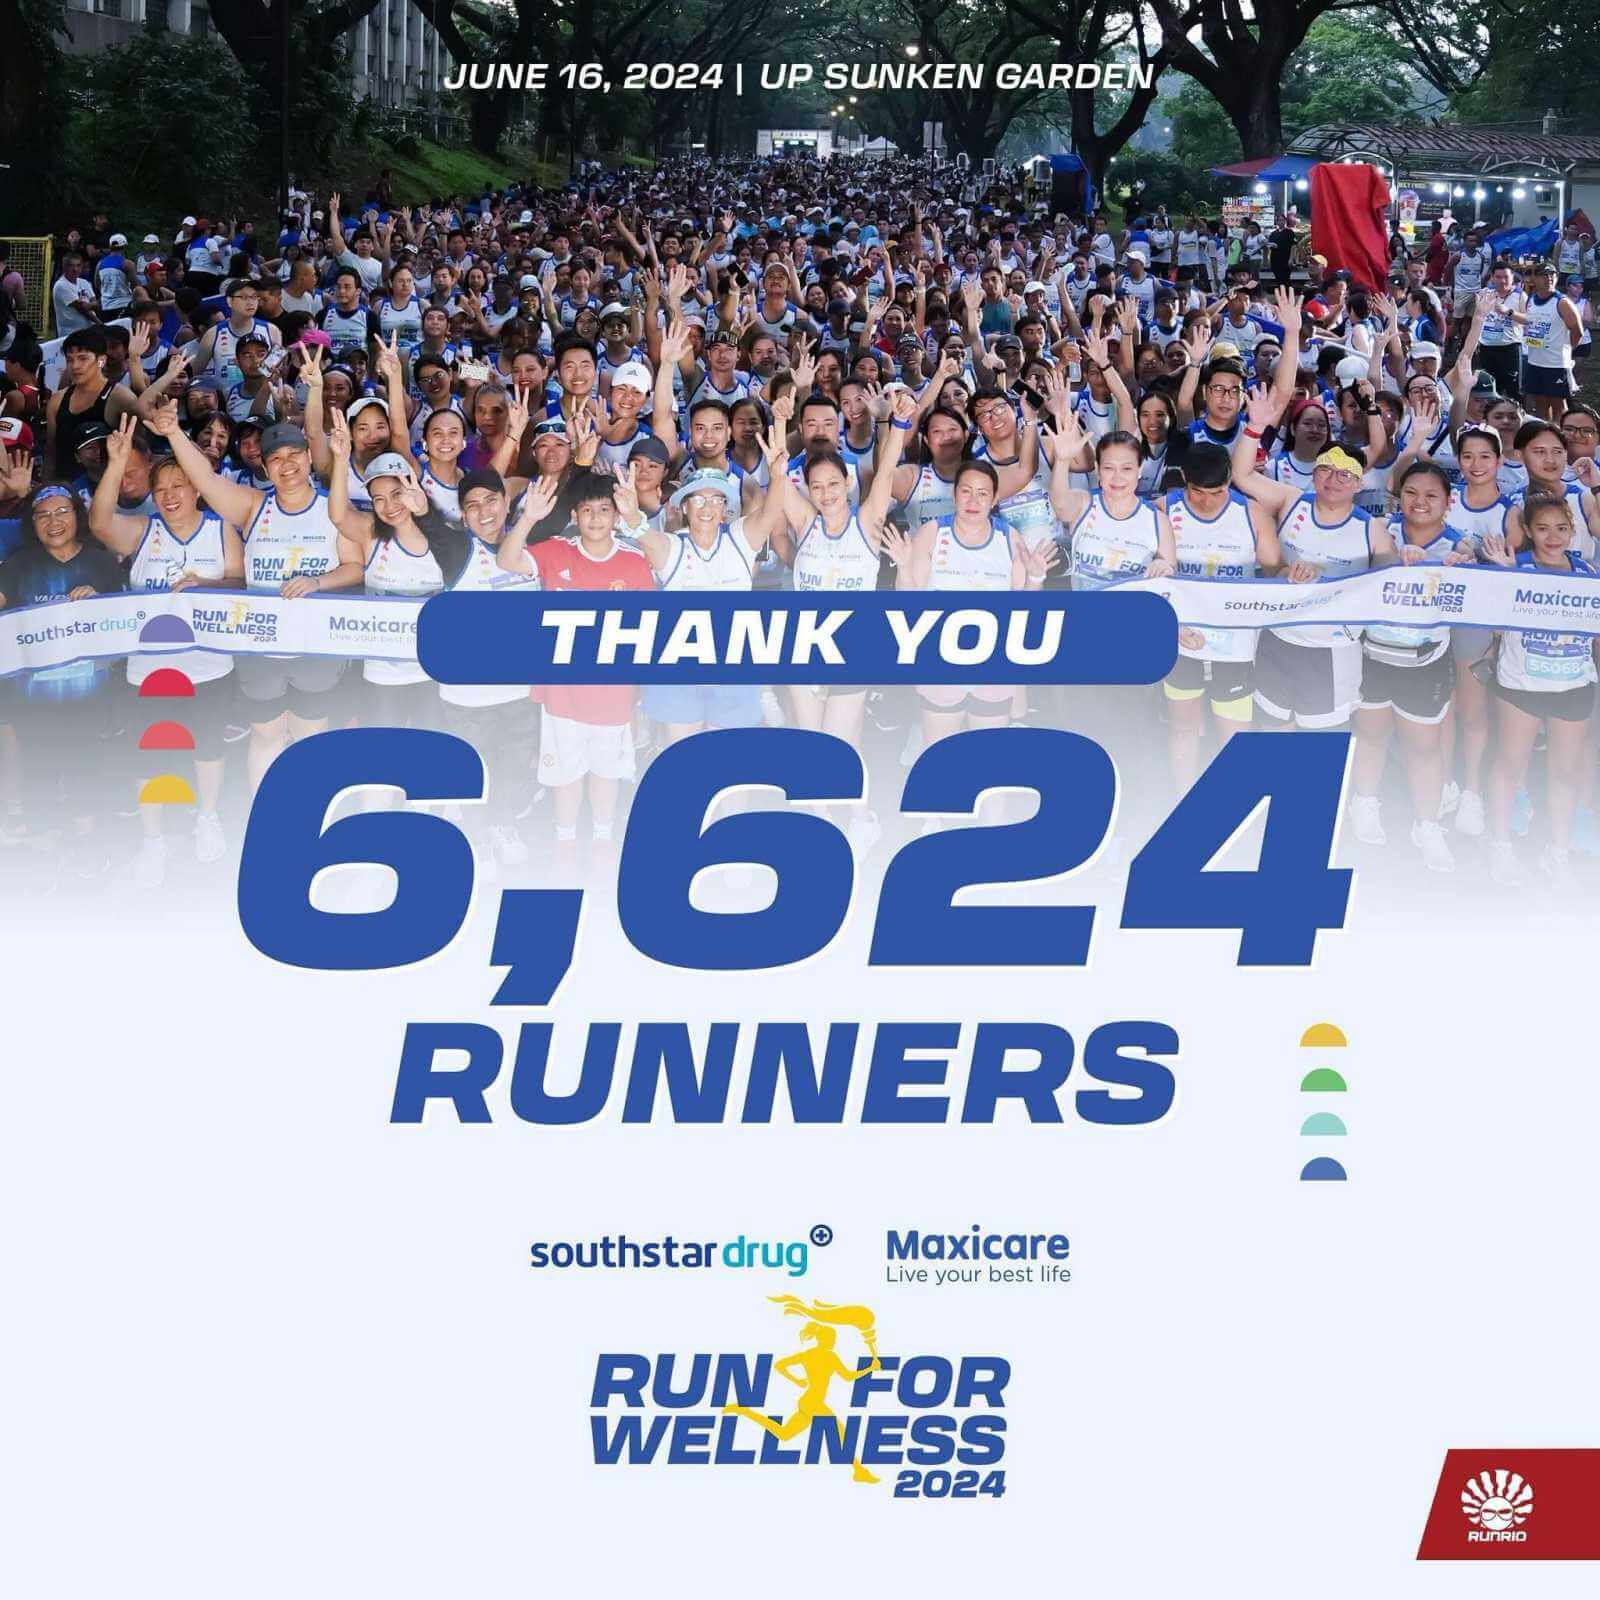 6,624 Runners #RiseAsChampions at Southstar Drug and Maxicare Run for Wellness 2024!